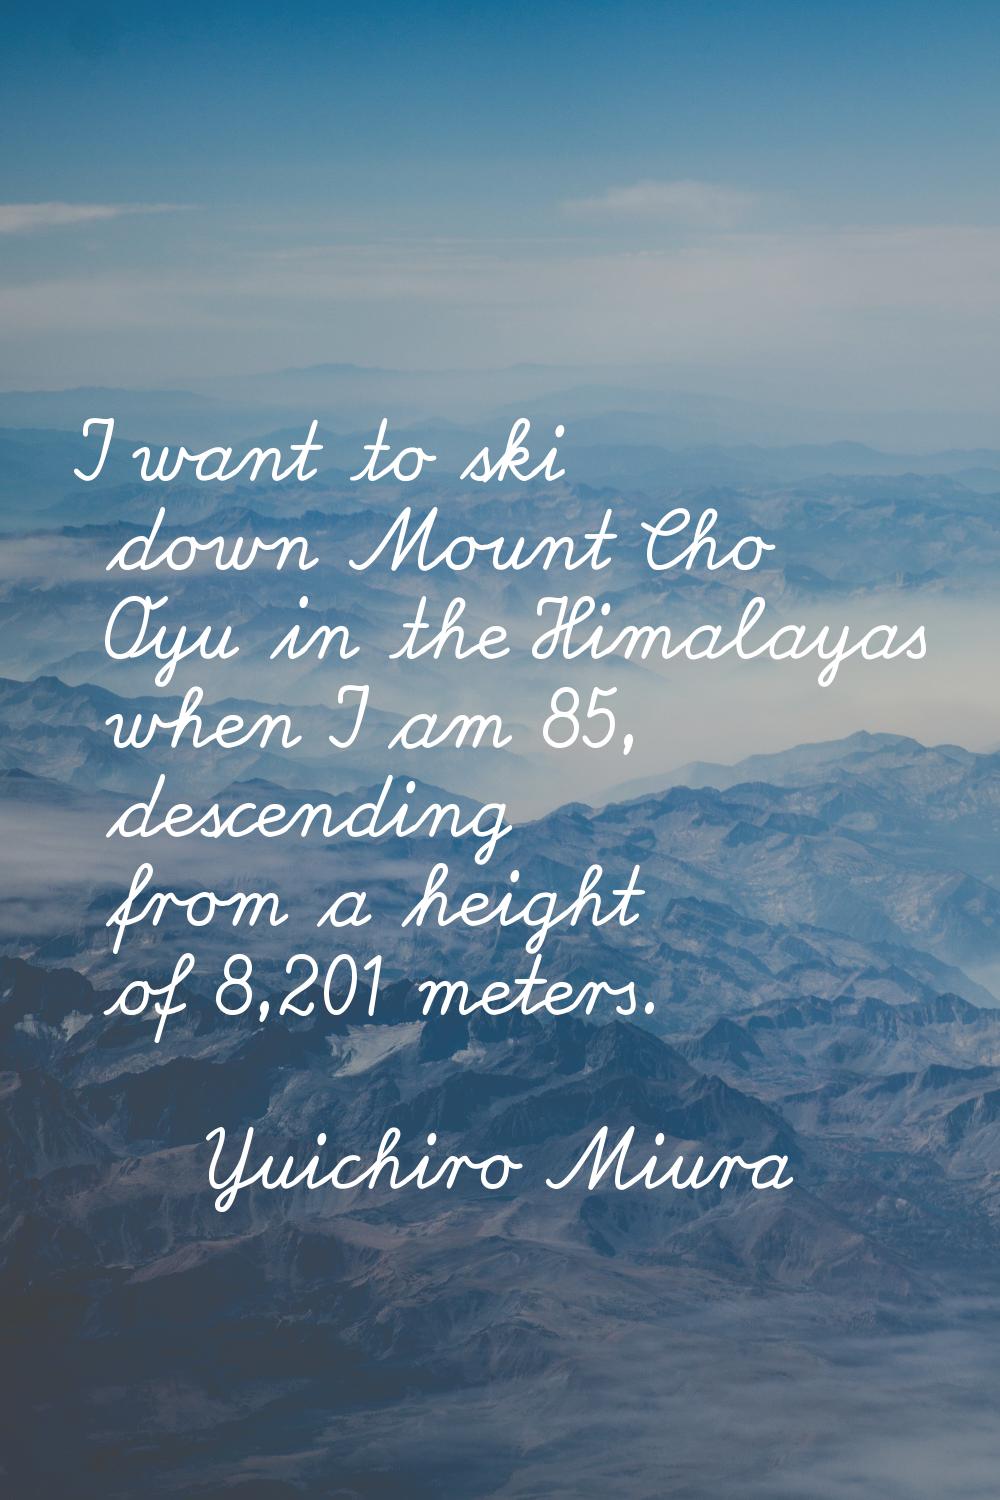 I want to ski down Mount Cho Oyu in the Himalayas when I am 85, descending from a height of 8,201 m